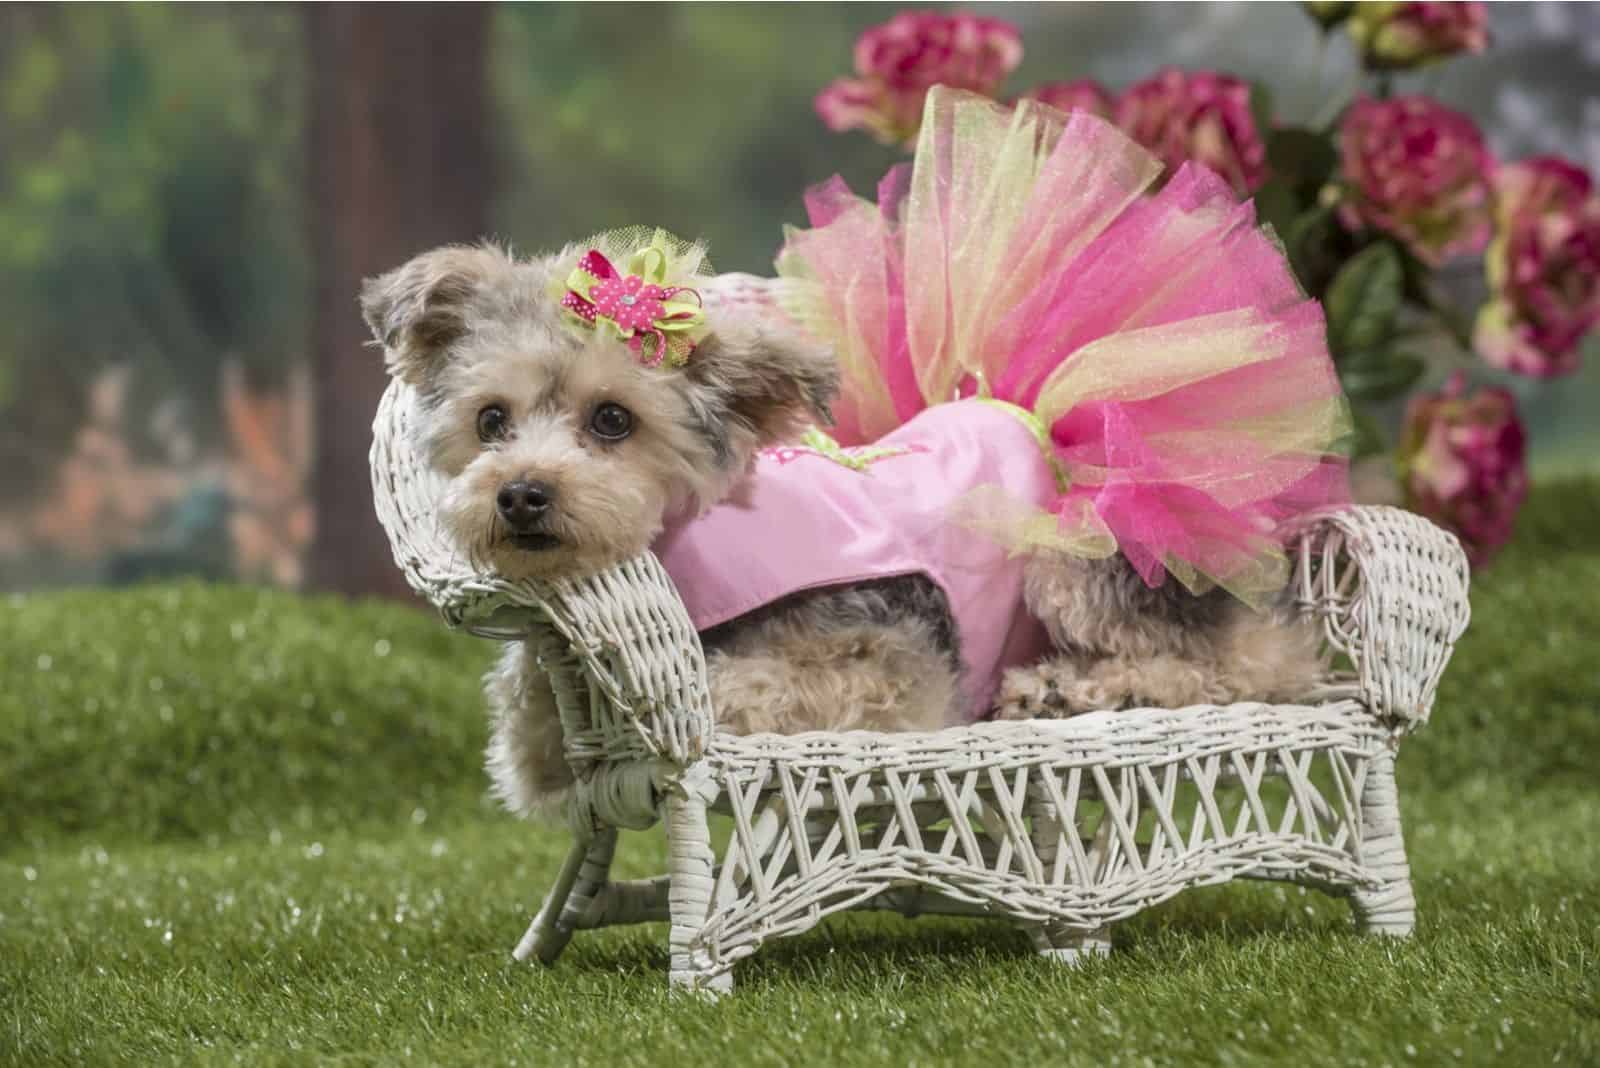 A yorkie-poo wearing a pink dress rests on a white wicker lounge chair in a spring garden scene